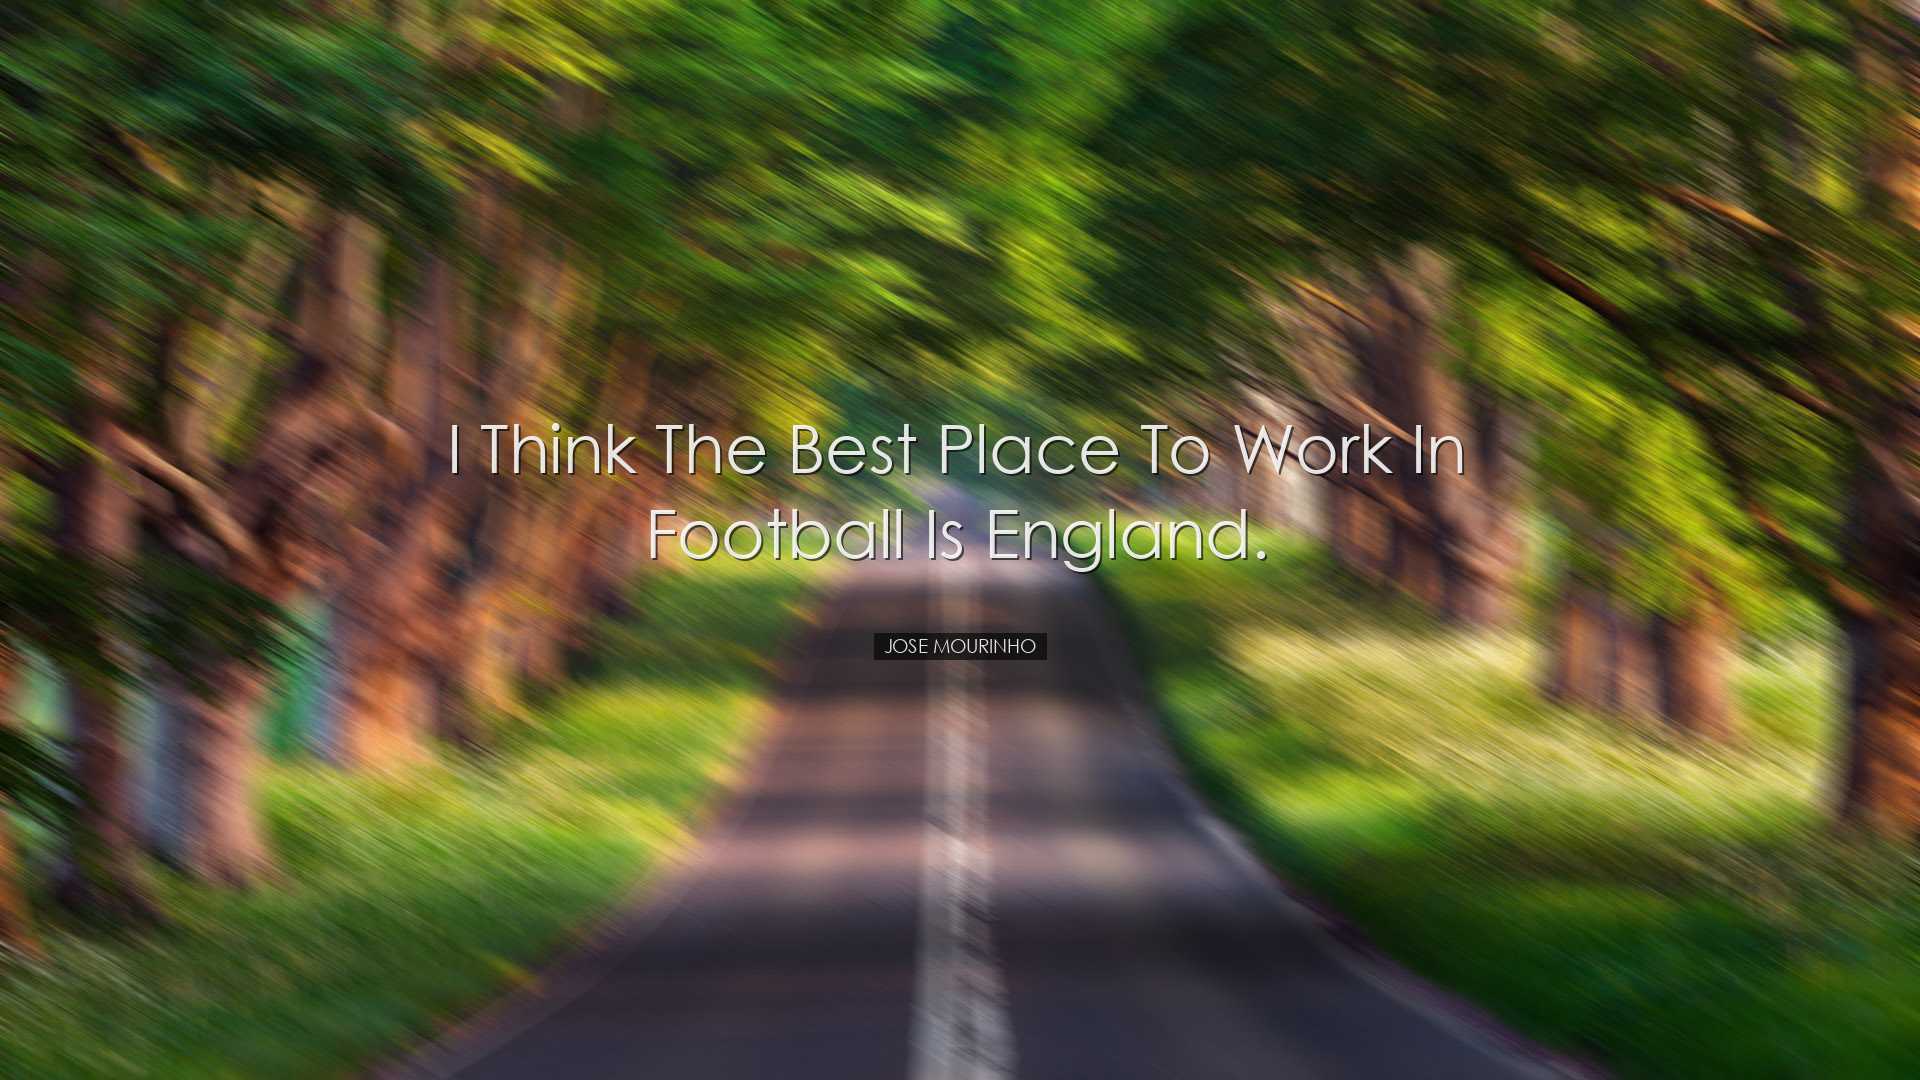 I think the best place to work in football is England. - Jose Mour